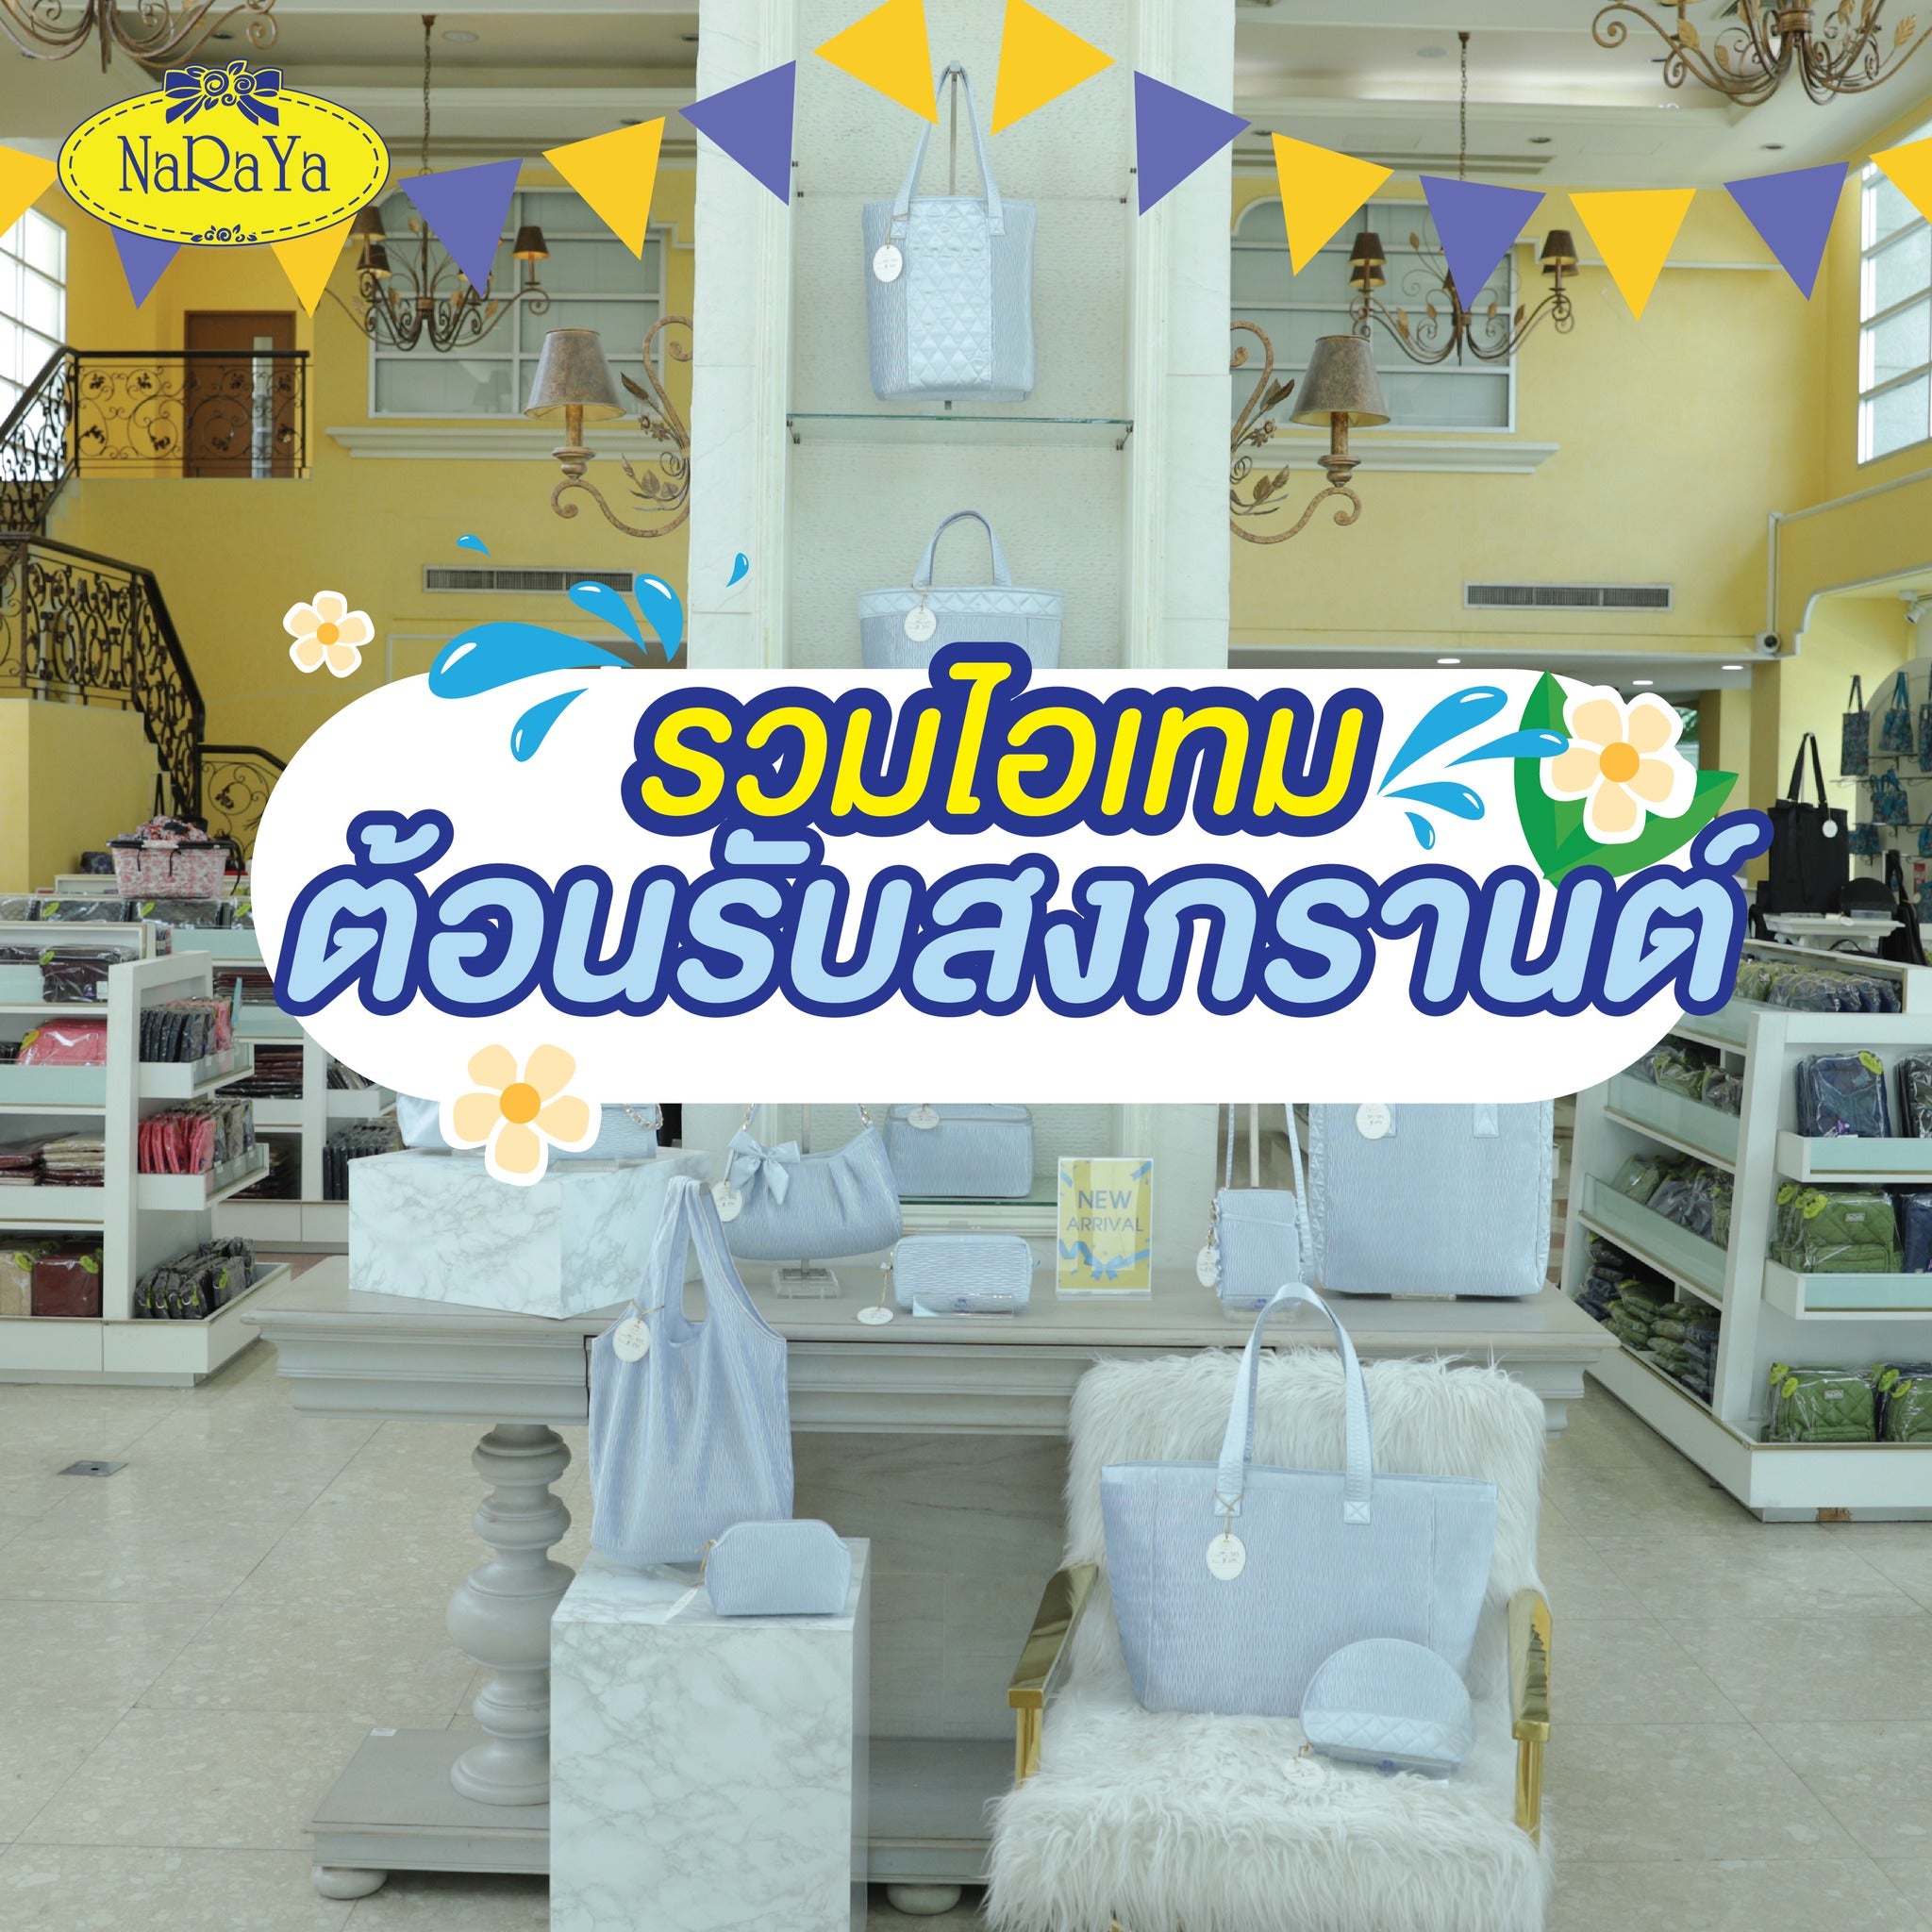 Celebrate Songkran with 9 special items from NaRaYa